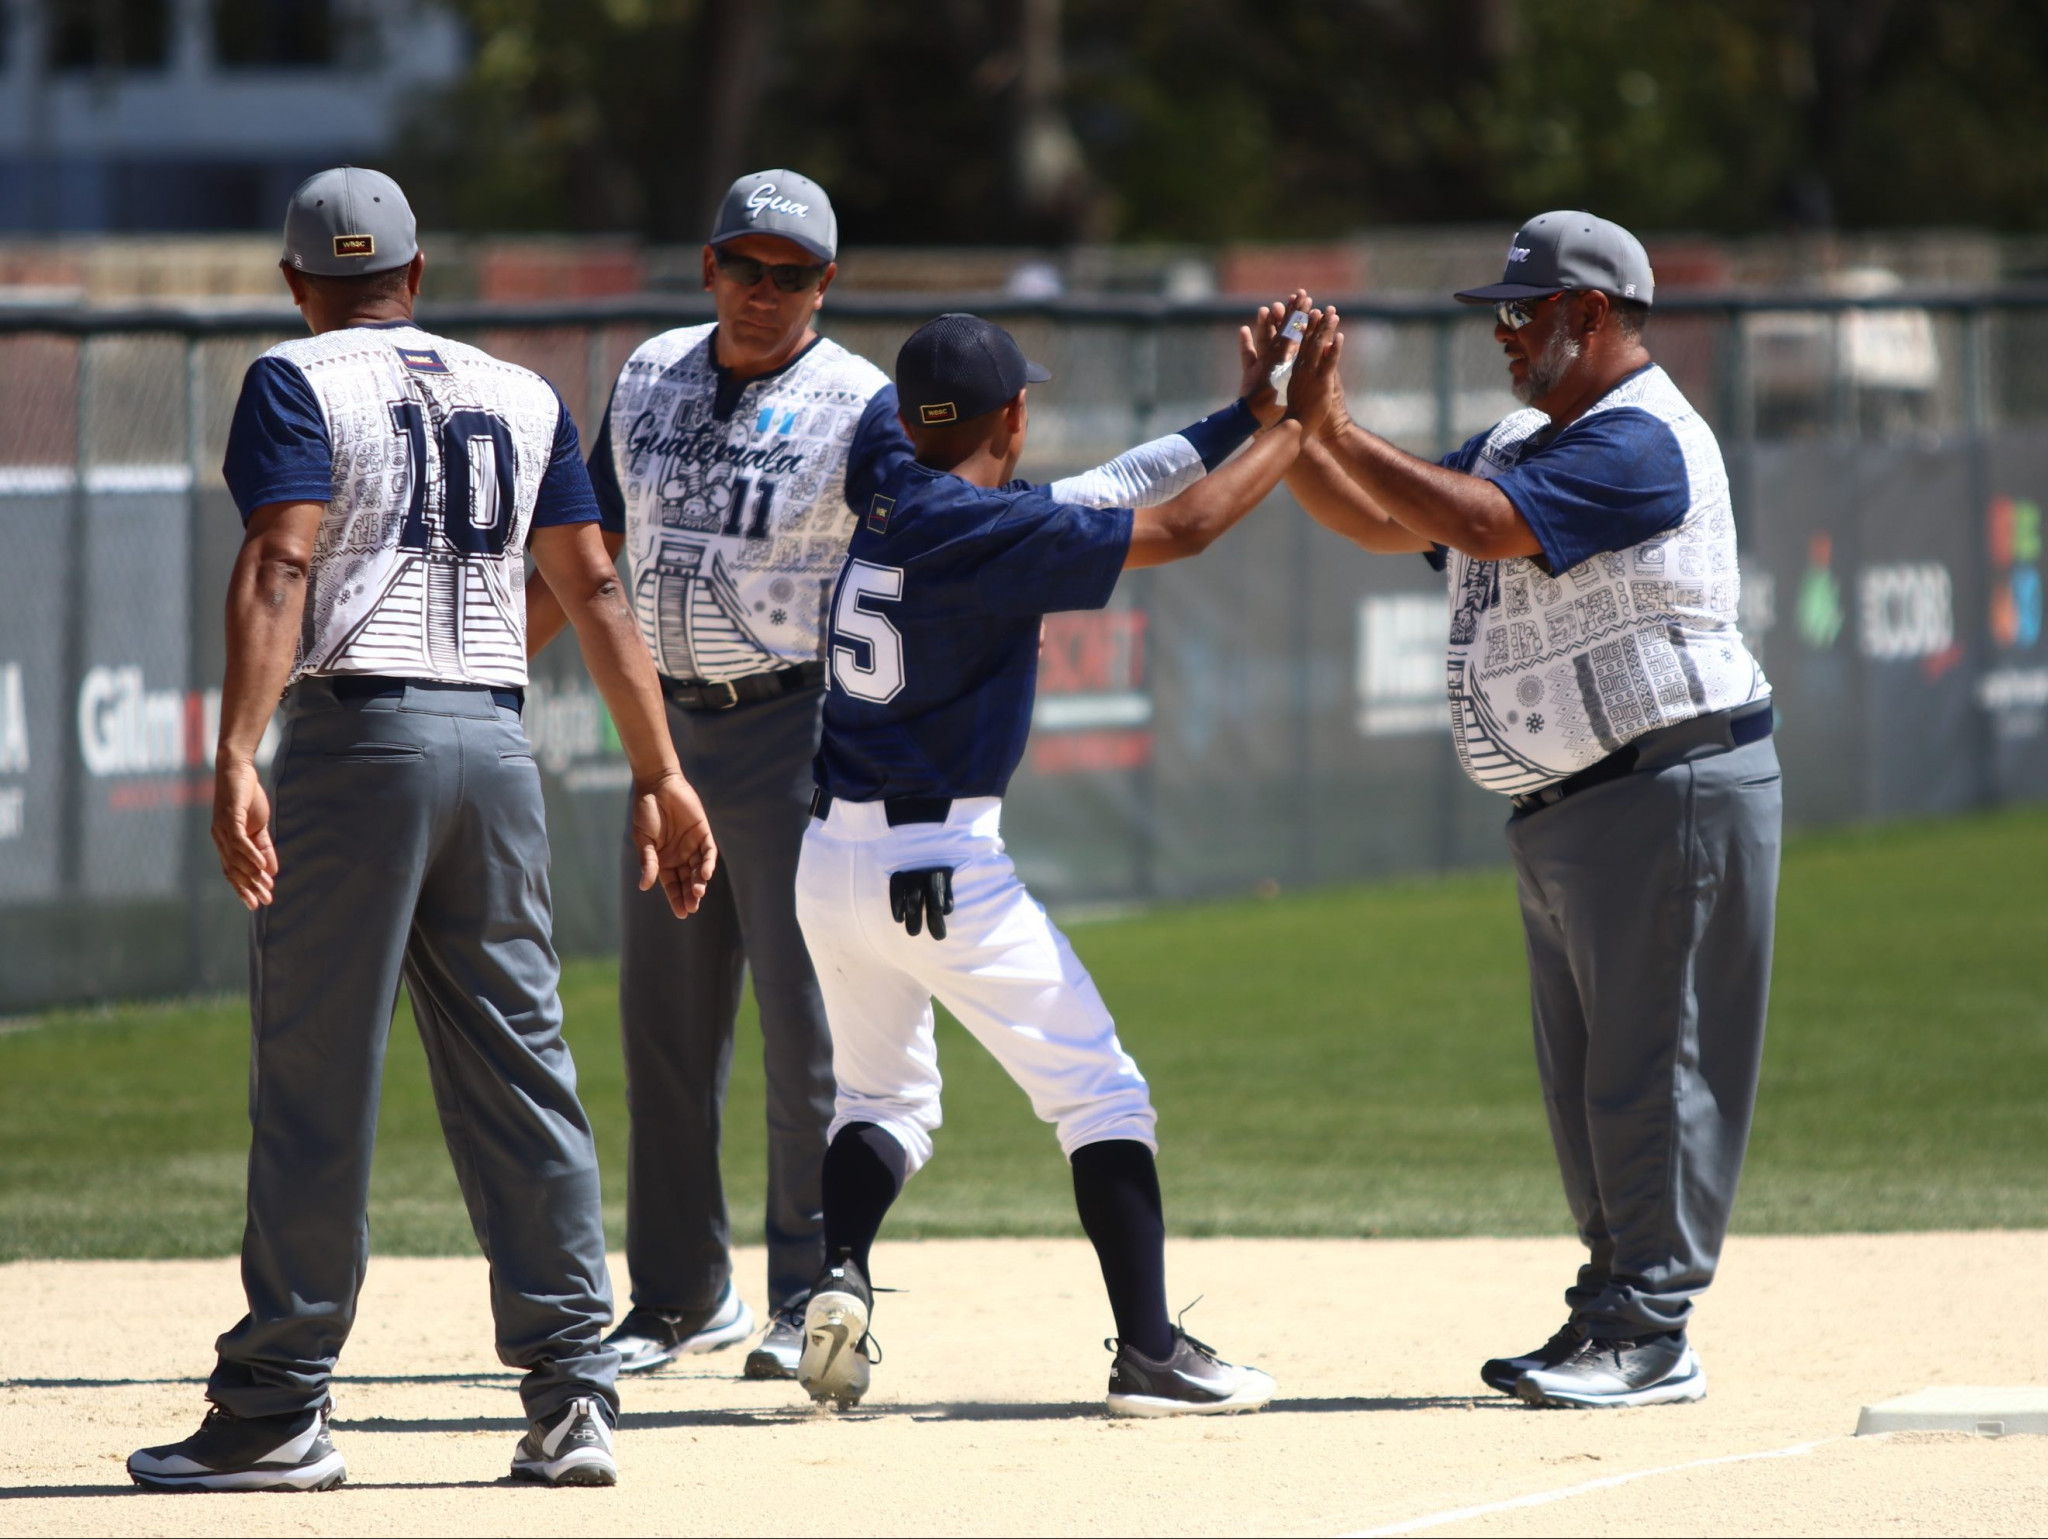 Guatemala edged past Mexico to reach the super round ©WBSC